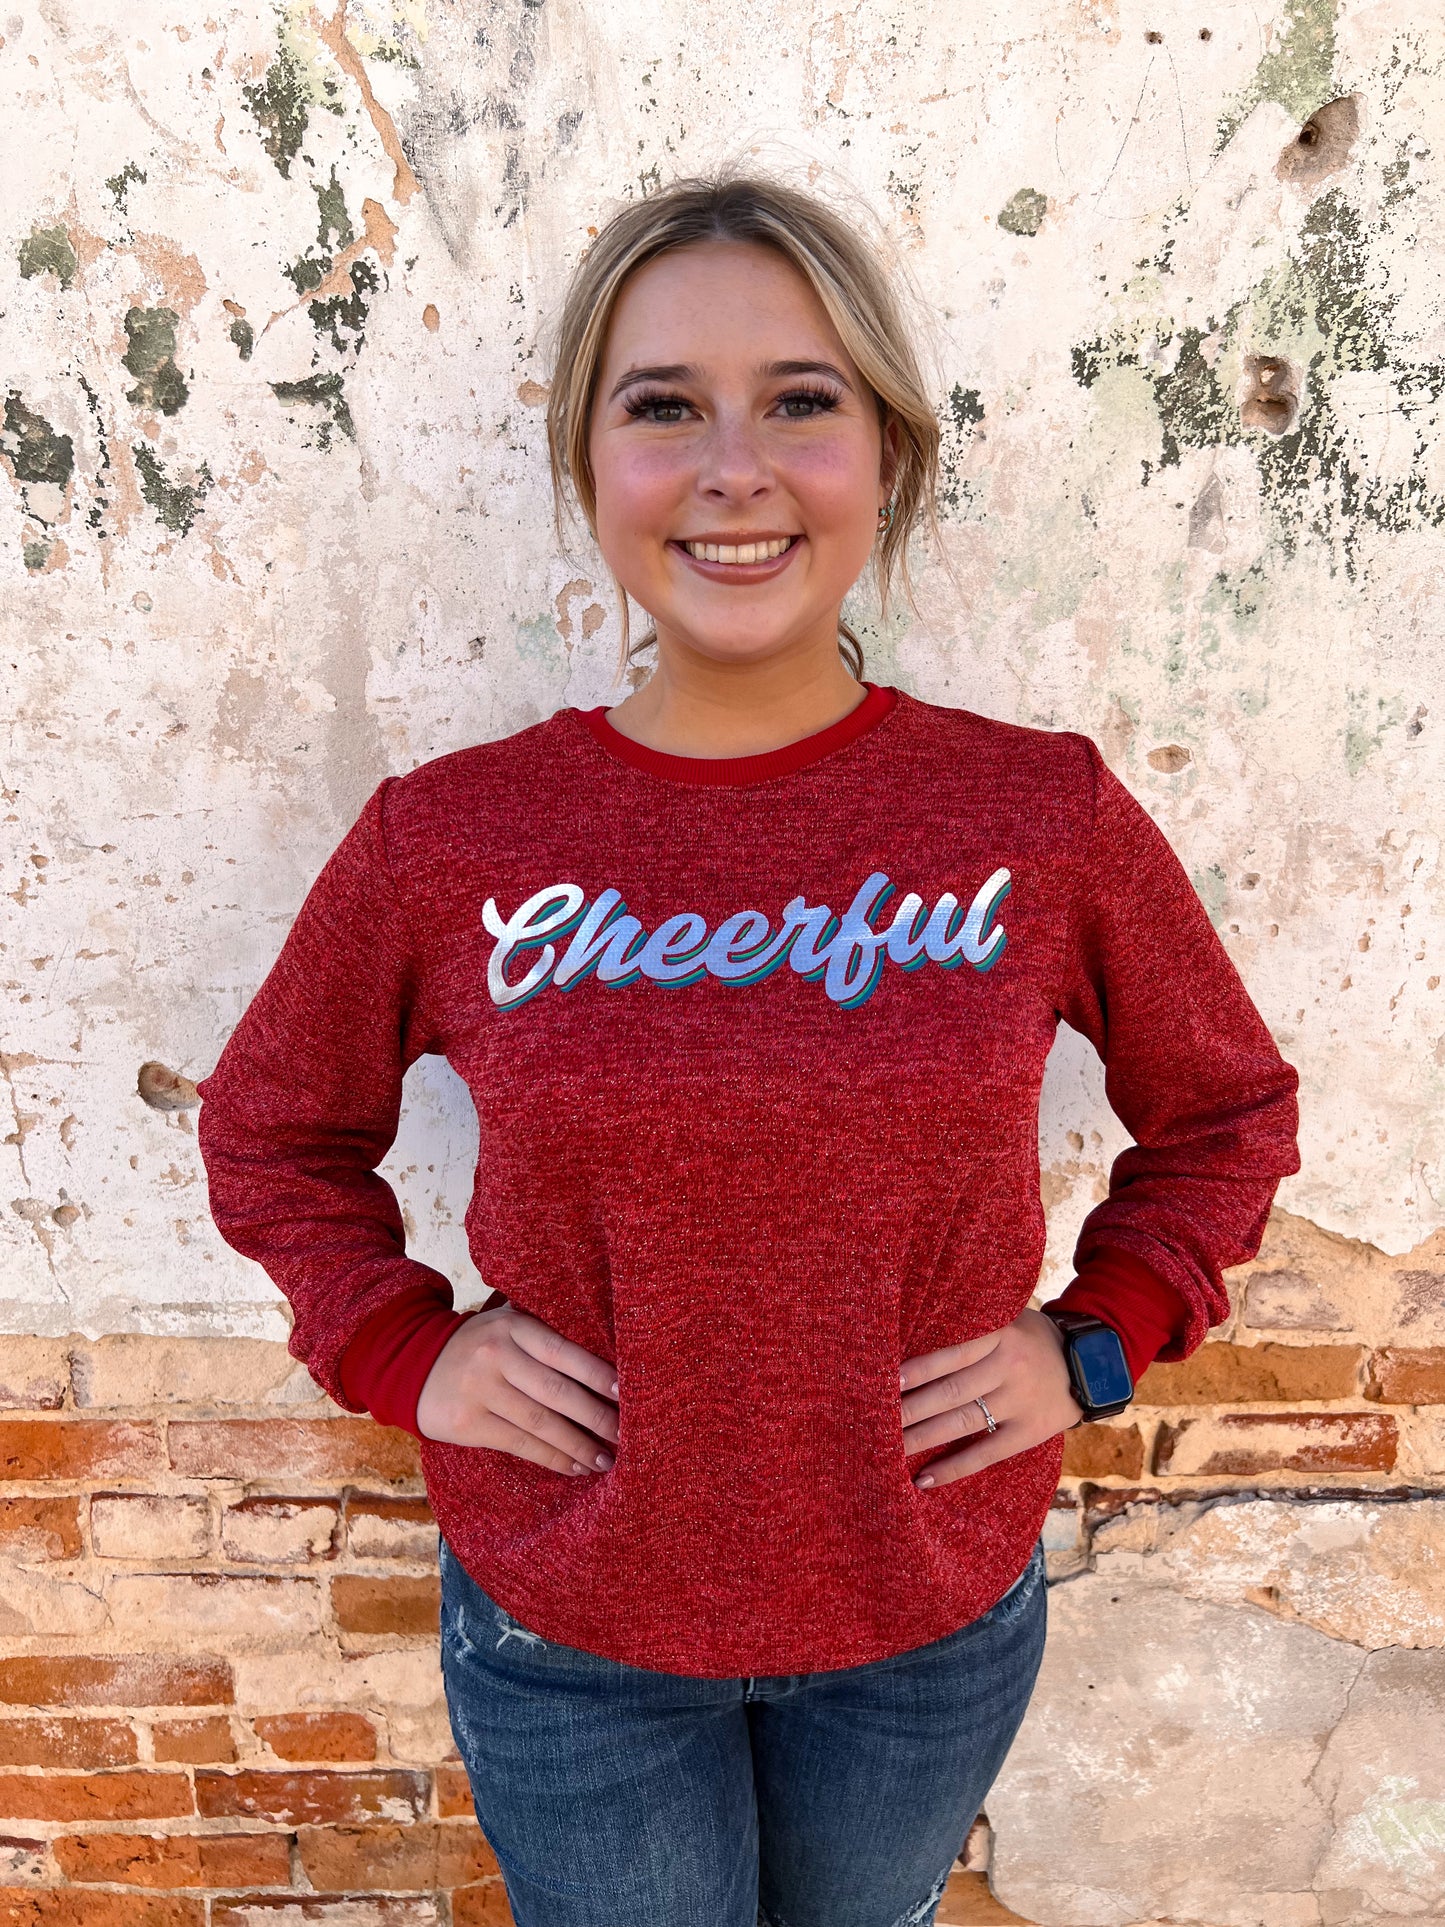 Cheerful on Sparkly Glitter Sweatshirt-Graphic T-Shirt-Southern Grace Wholesale-Bin b6-The Twisted Chandelier